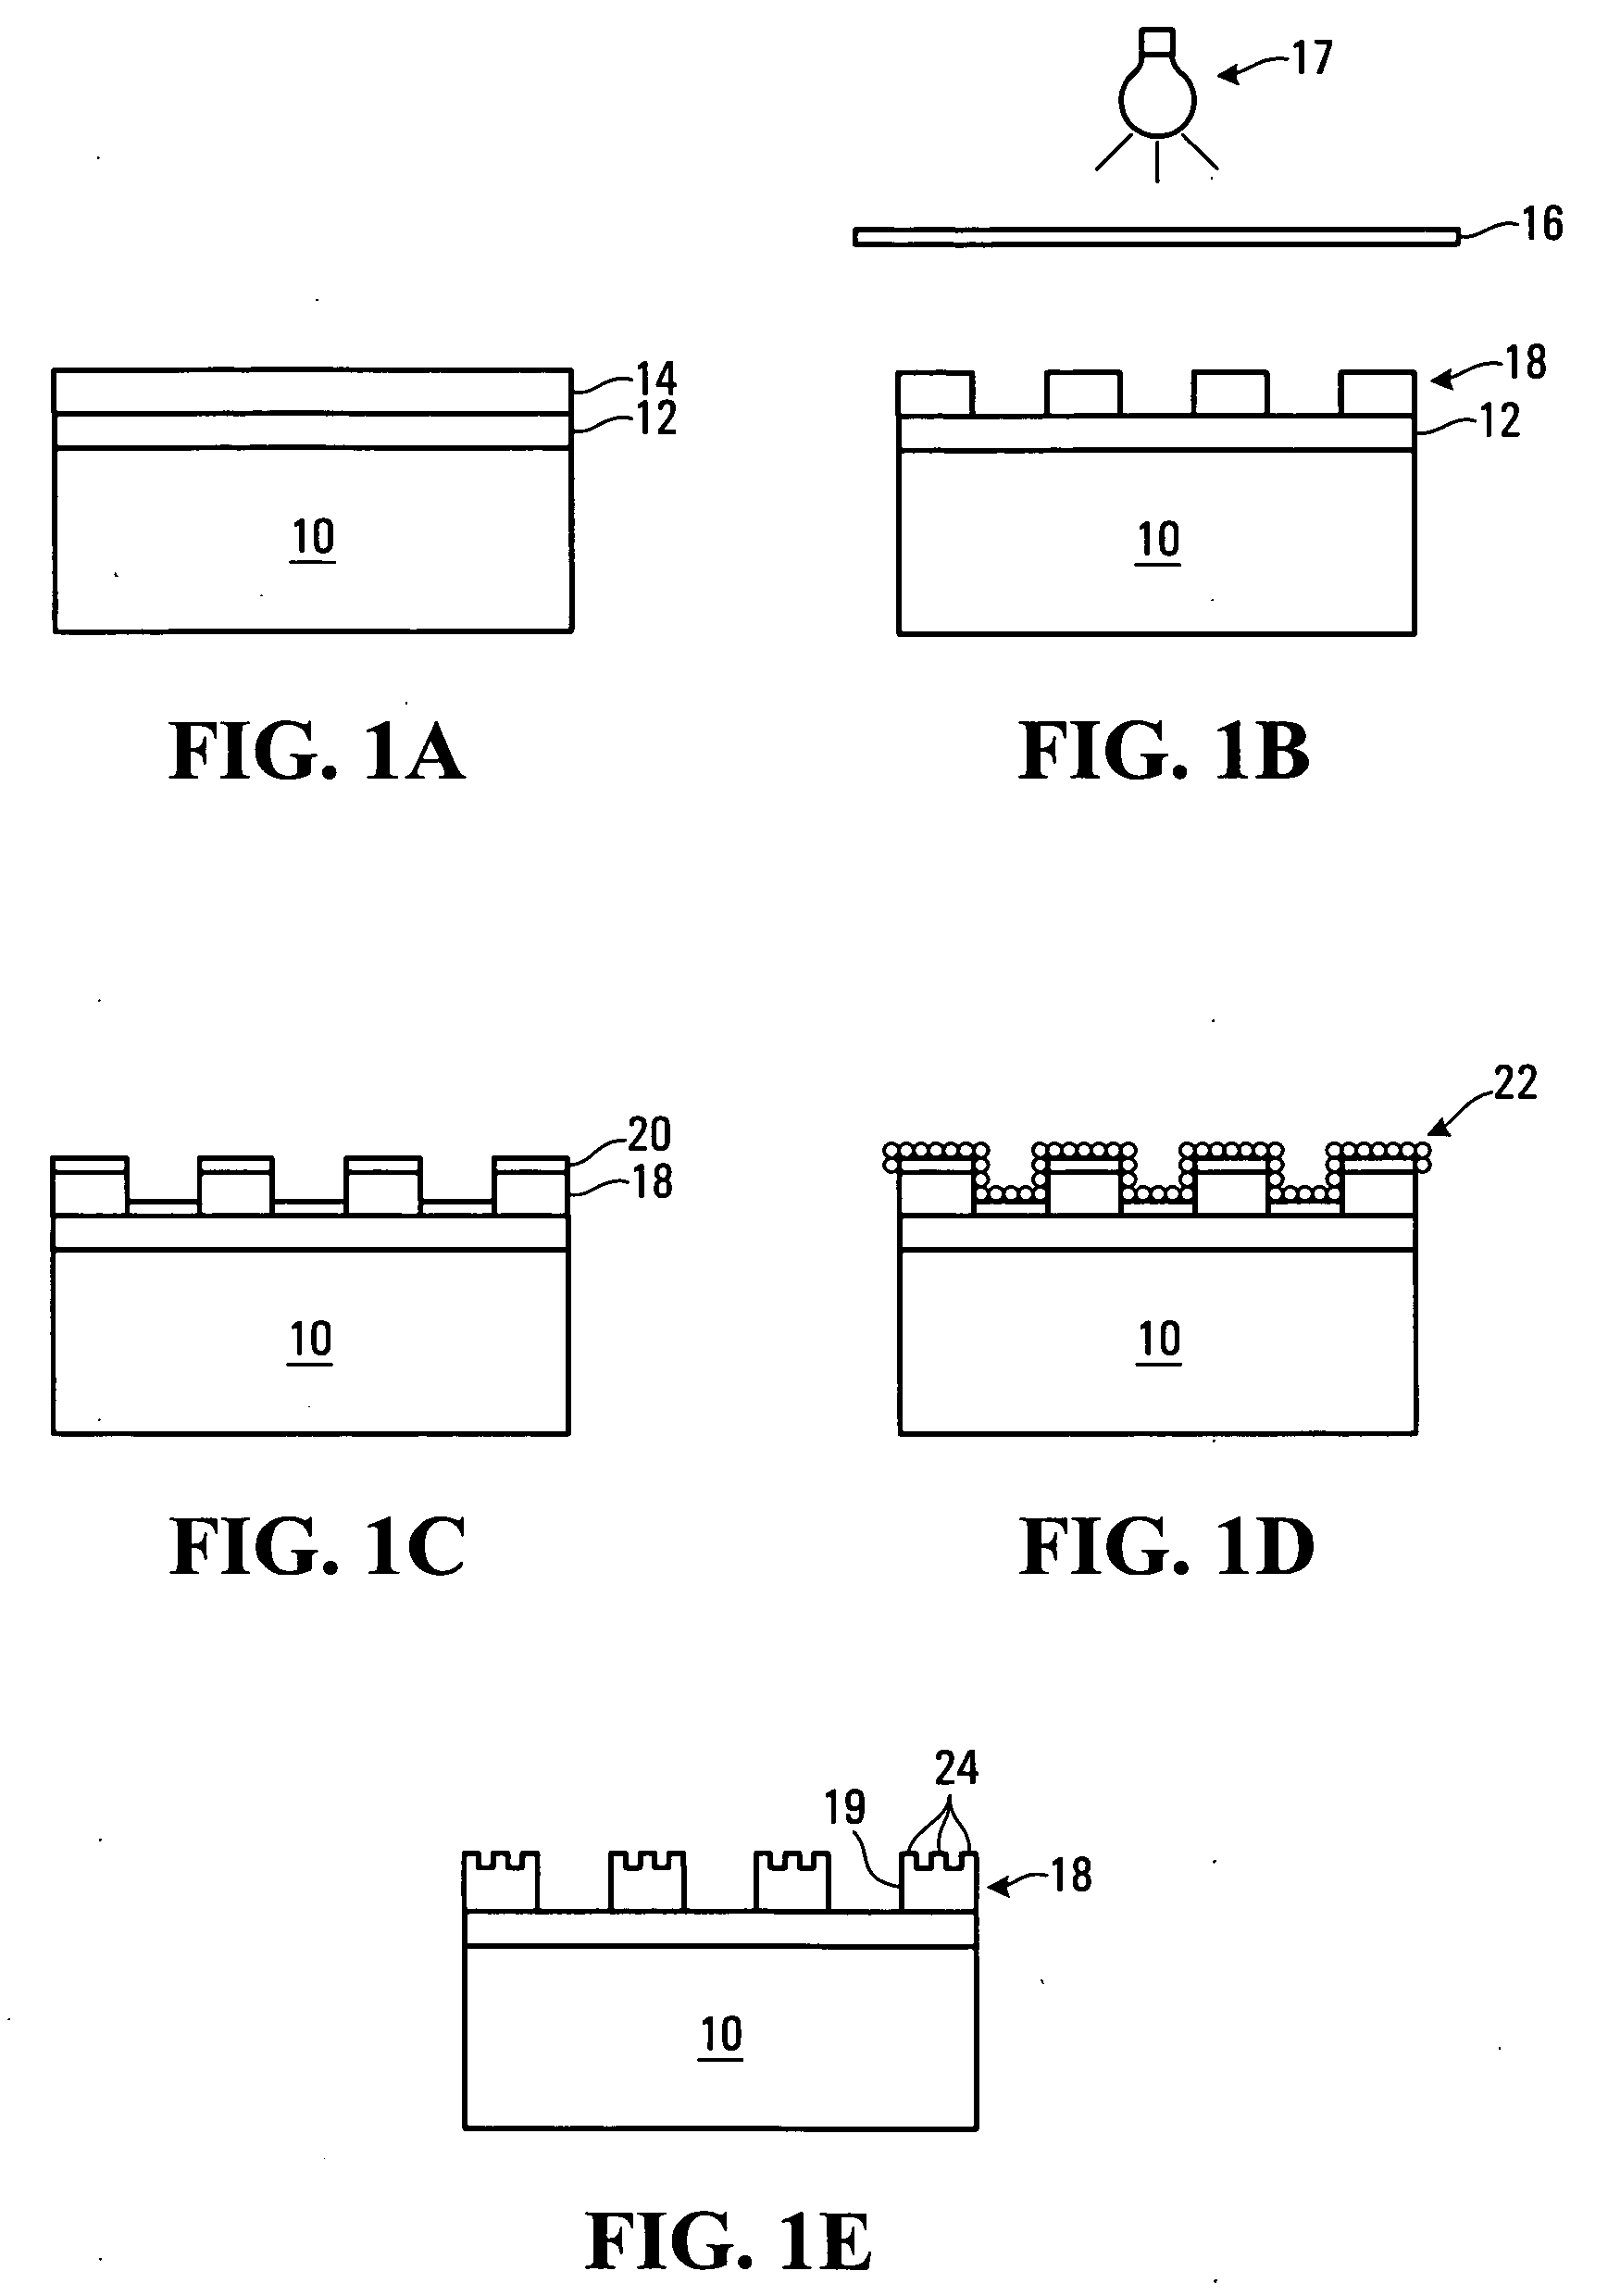 Method of forming branched structures